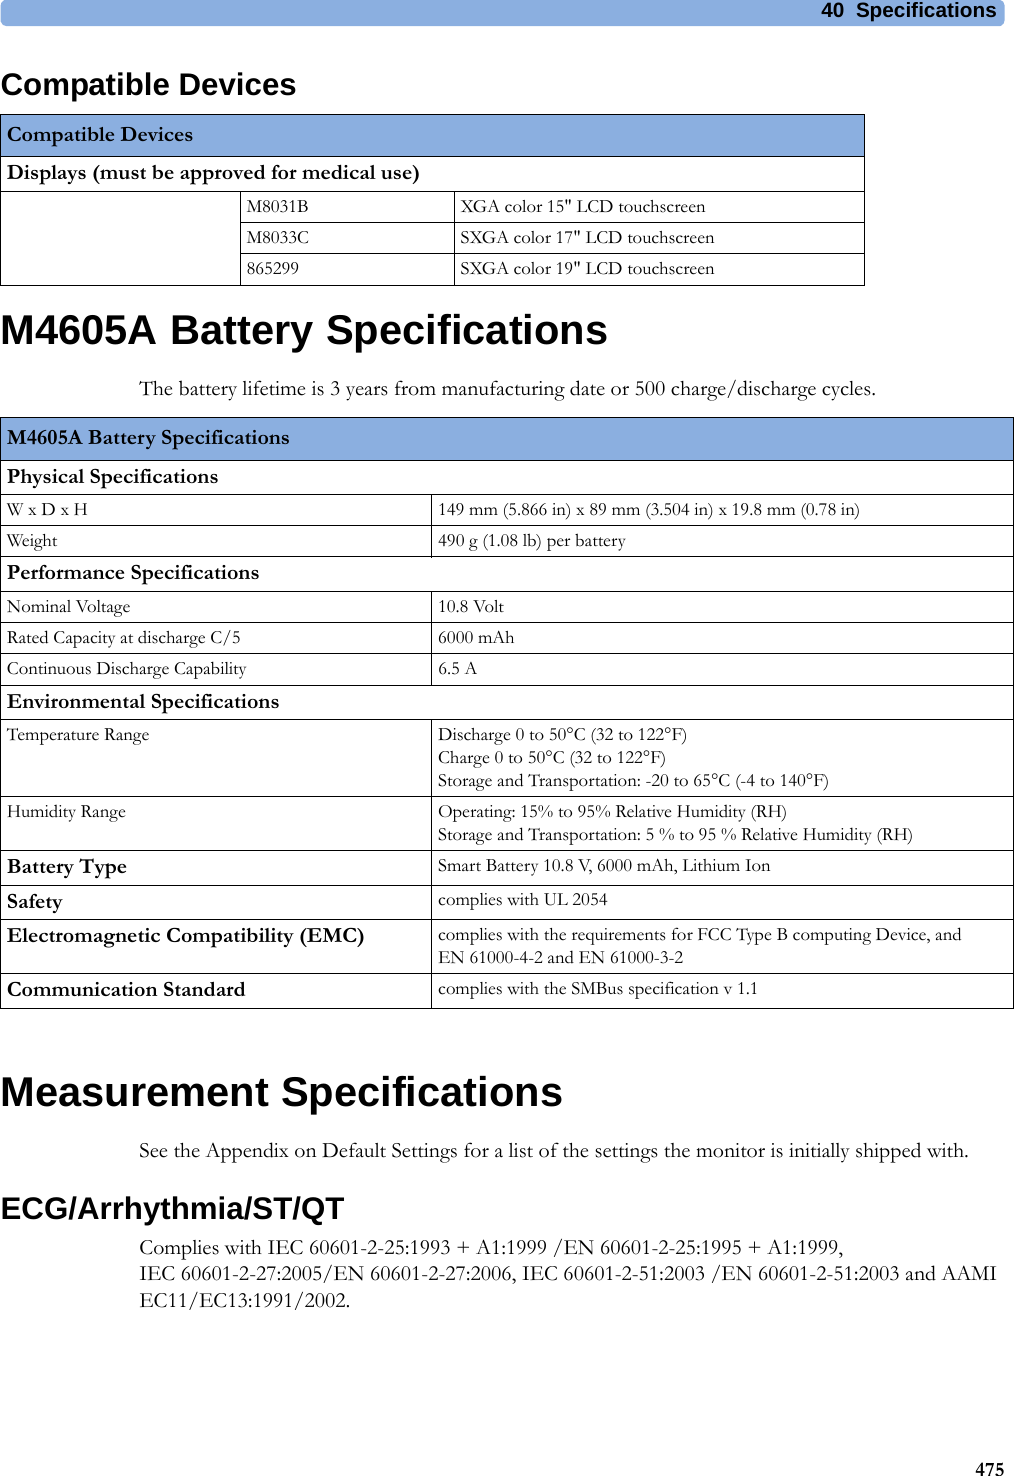 40 Specifications475Compatible DevicesM4605A Battery SpecificationsThe battery lifetime is 3 years from manufacturing date or 500 charge/discharge cycles.Measurement SpecificationsSee the Appendix on Default Settings for a list of the settings the monitor is initially shipped with.ECG/Arrhythmia/ST/QTComplies with IEC 60601-2-25:1993 + A1:1999 /EN 60601-2-25:1995 + A1:1999, IEC 60601-2-27:2005/EN 60601-2-27:2006, IEC 60601-2-51:2003 /EN 60601-2-51:2003 and AAMI EC11/EC13:1991/2002.Compatible DevicesDisplays (must be approved for medical use)M8031B XGA color 15&quot; LCD touchscreenM8033C SXGA color 17&quot; LCD touchscreen865299 SXGA color 19&quot; LCD touchscreenM4605A Battery SpecificationsPhysical SpecificationsW x D x H 149 mm (5.866 in) x 89 mm (3.504 in) x 19.8 mm (0.78 in)Weight 490 g (1.08 lb) per batteryPerformance SpecificationsNominal Voltage 10.8 VoltRated Capacity at discharge C/5 6000 mAhContinuous Discharge Capability 6.5 AEnvironmental SpecificationsTemperature Range Discharge 0 to 50°C (32 to 122°F)Charge 0 to 50°C (32 to 122°F)Storage and Transportation: -20 to 65°C (-4 to 140°F)Humidity Range Operating: 15% to 95% Relative Humidity (RH)Storage and Transportation: 5 % to 95 % Relative Humidity (RH)Battery Type Smart Battery 10.8 V, 6000 mAh, Lithium IonSafety complies with UL 2054Electromagnetic Compatibility (EMC) complies with the requirements for FCC Type B computing Device, and EN 61000-4-2 and EN 61000-3-2Communication Standard complies with the SMBus specification v 1.1